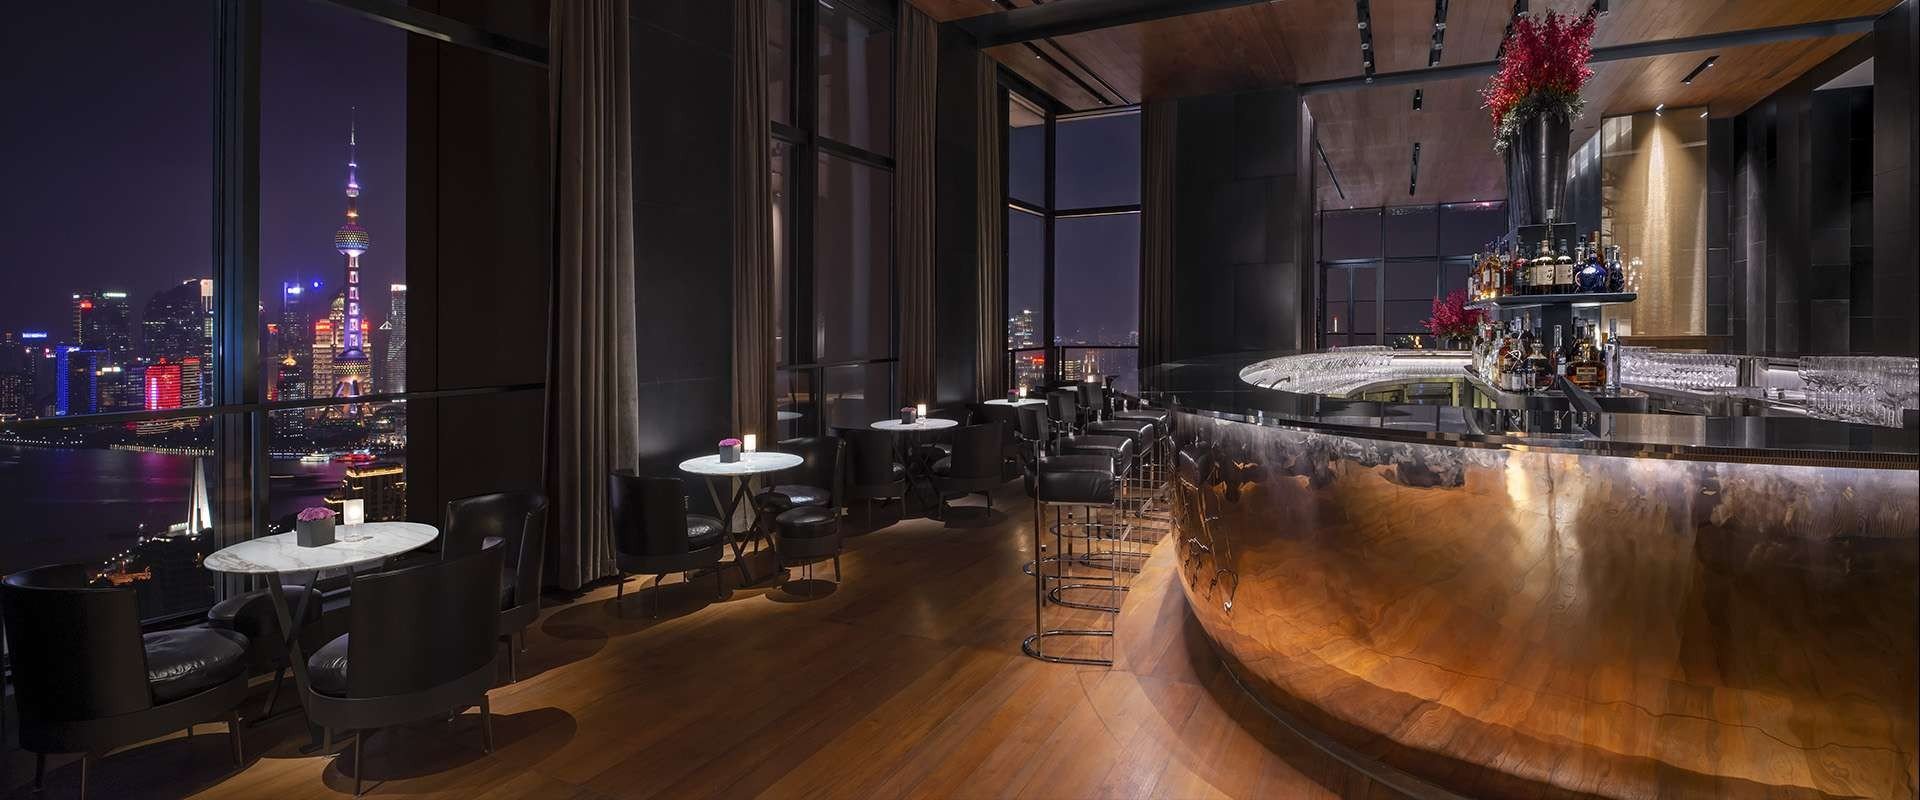 Il Bar in the new Bulgari Hotel Shanghai, China is a sleek space of polished wood and black leather furnishings.